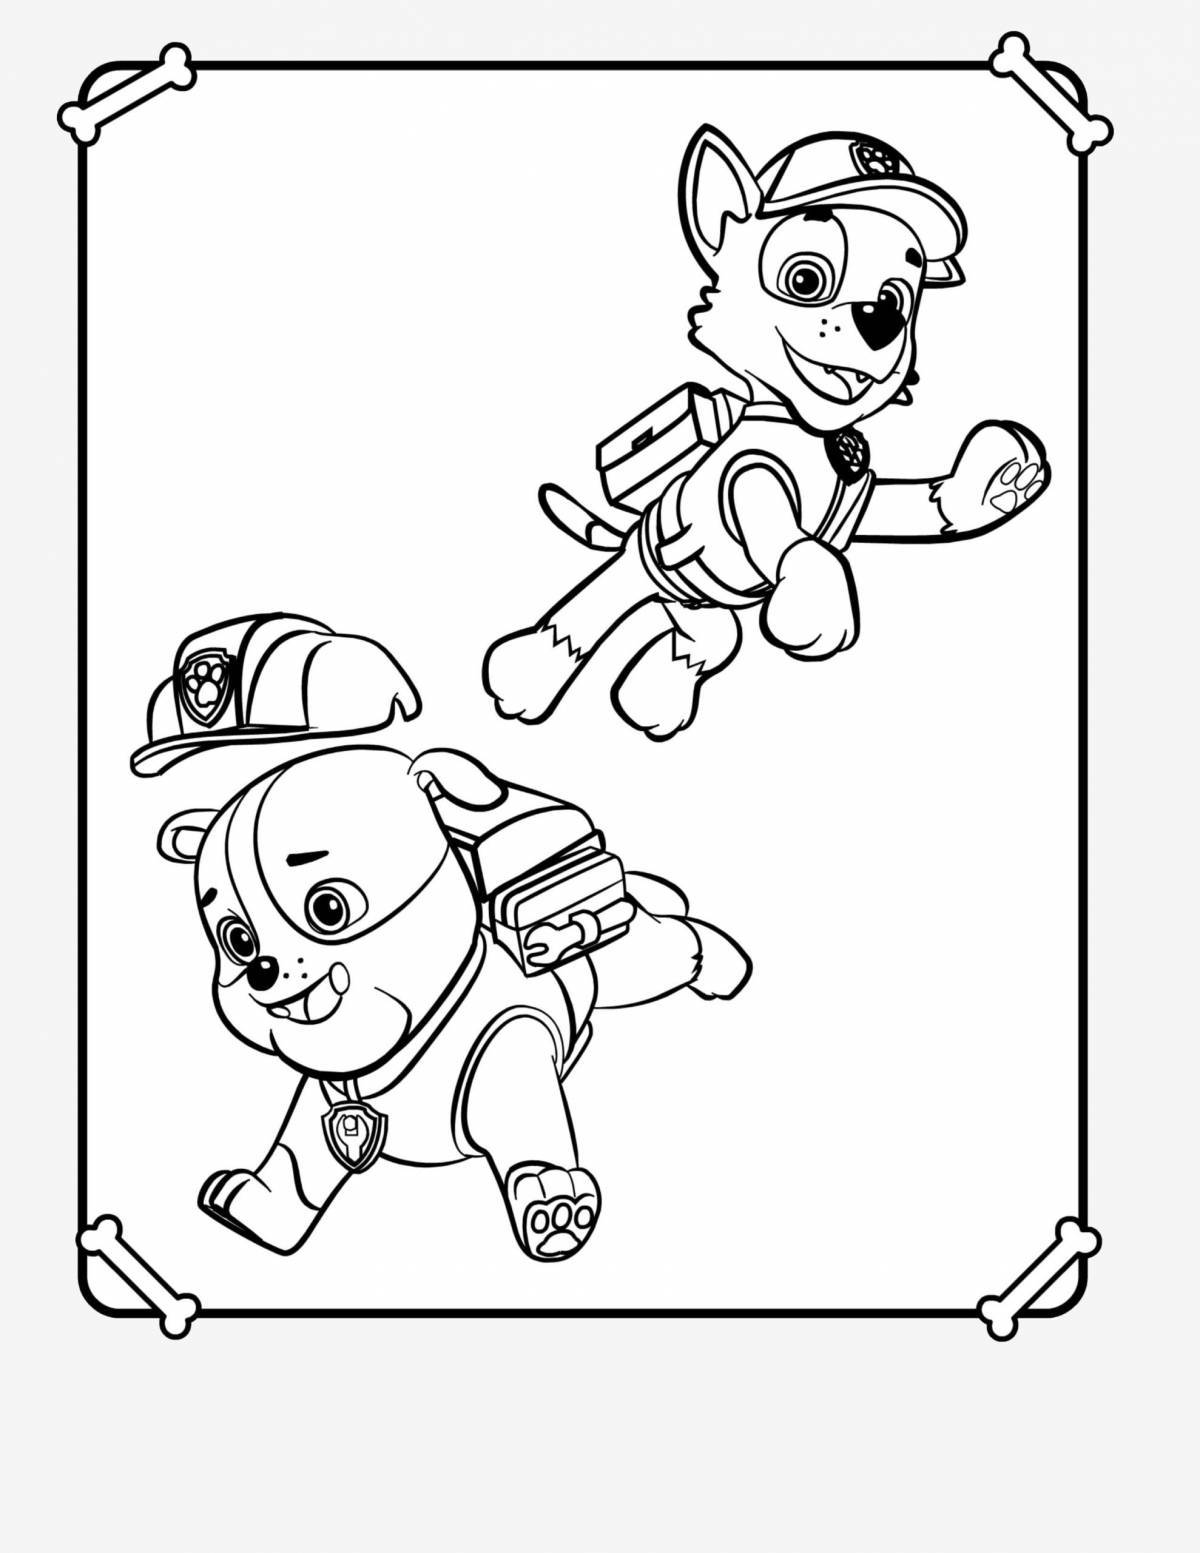 Animated rocky paw patrol coloring book